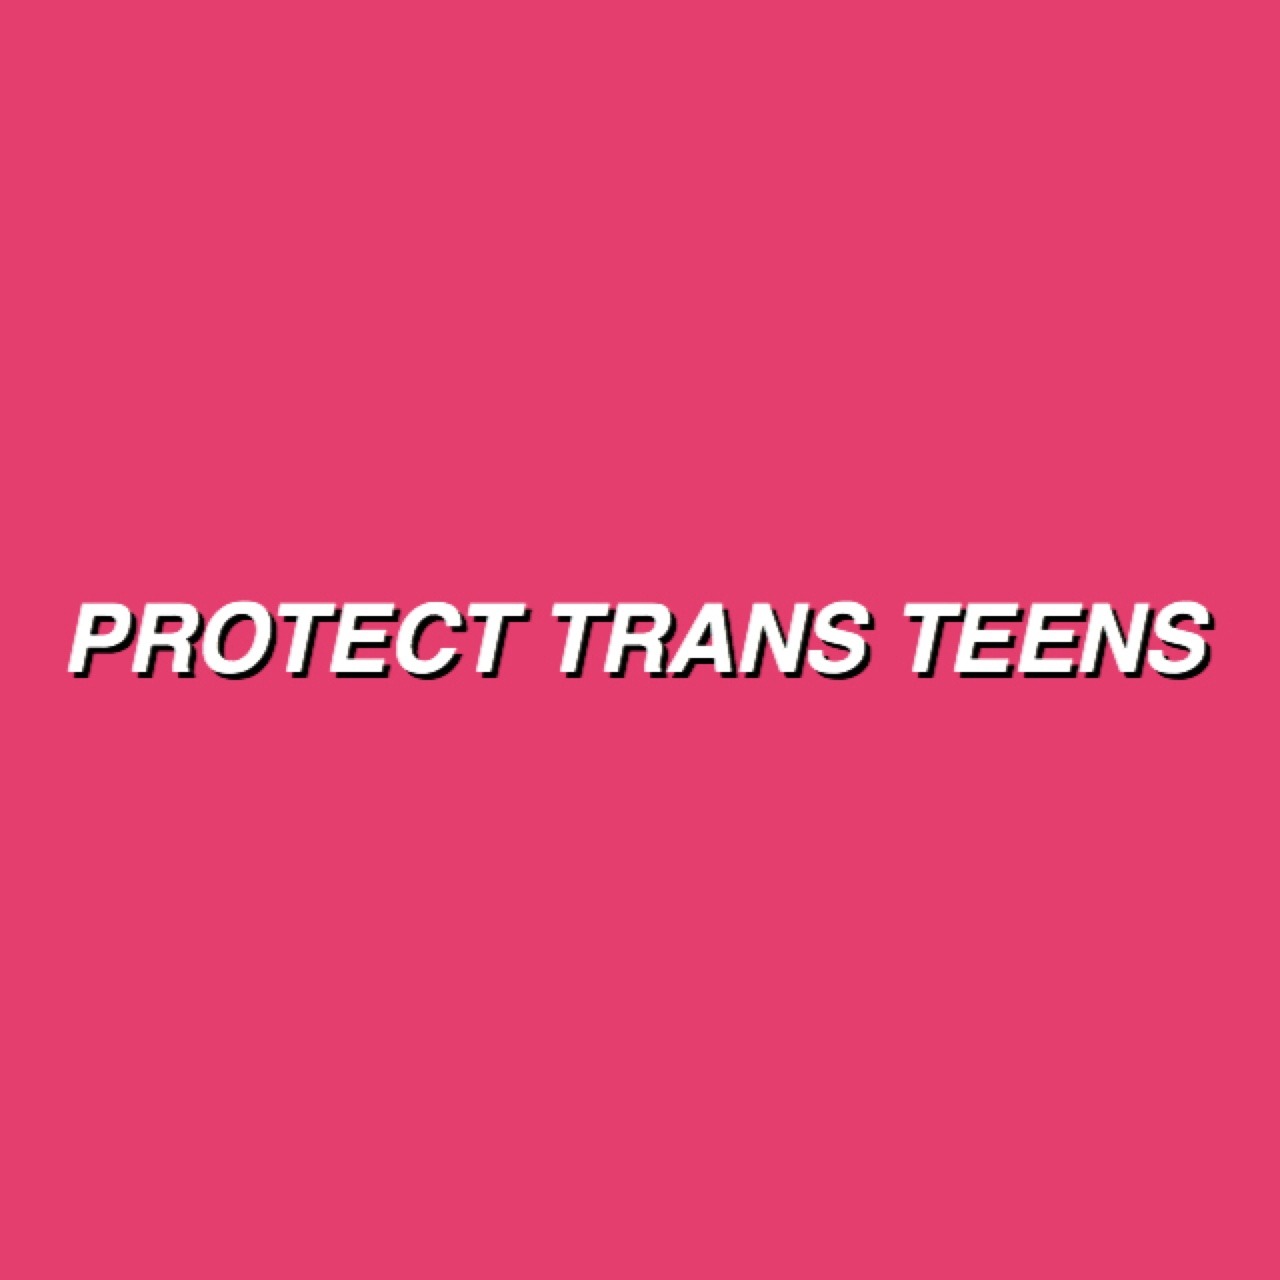 realtransfacts:  Protect trans kids | Protects trans teens | Protect trans adults